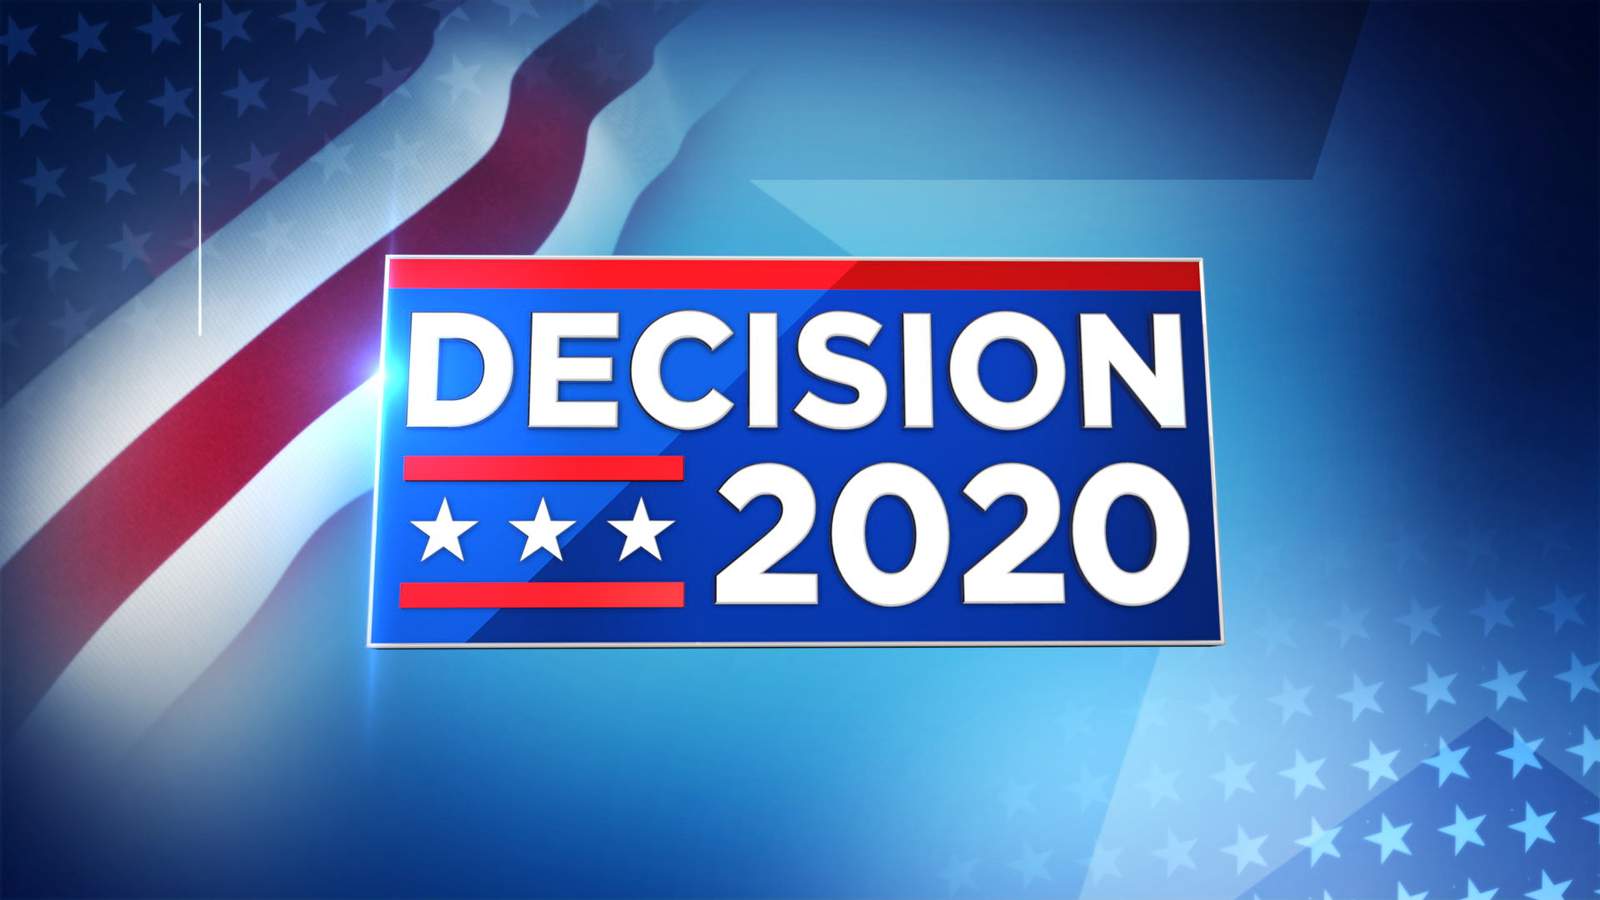 Michigan Primary Election Results for Rose Township on Aug. 4, 2020